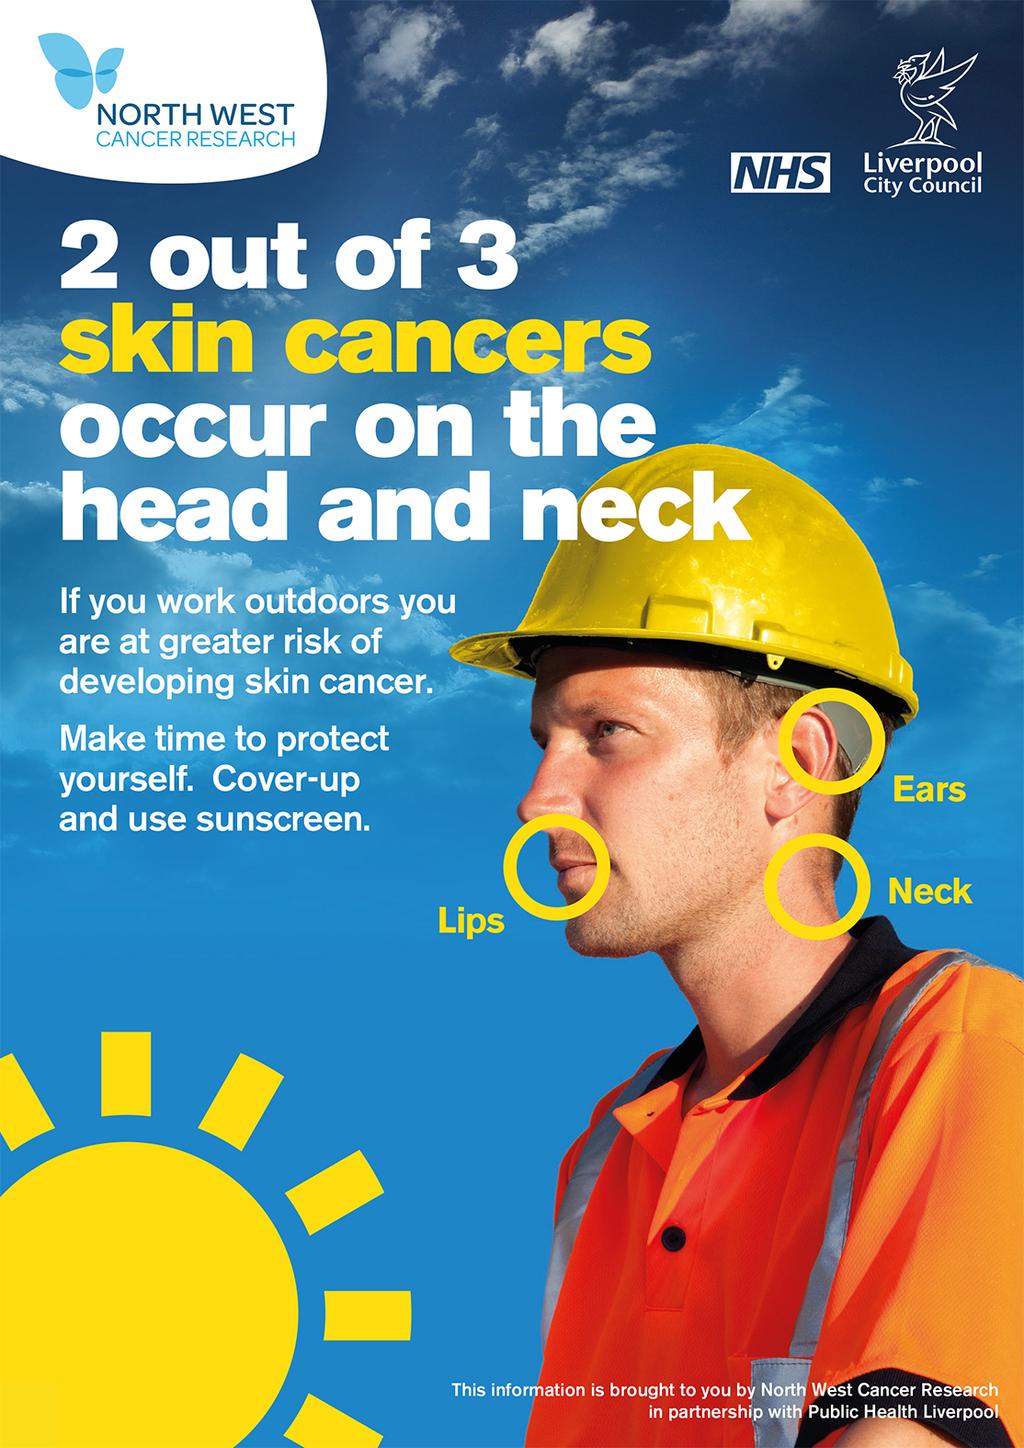 found. The poster shows that workers are at risk of sun damage even when it is cloudy.